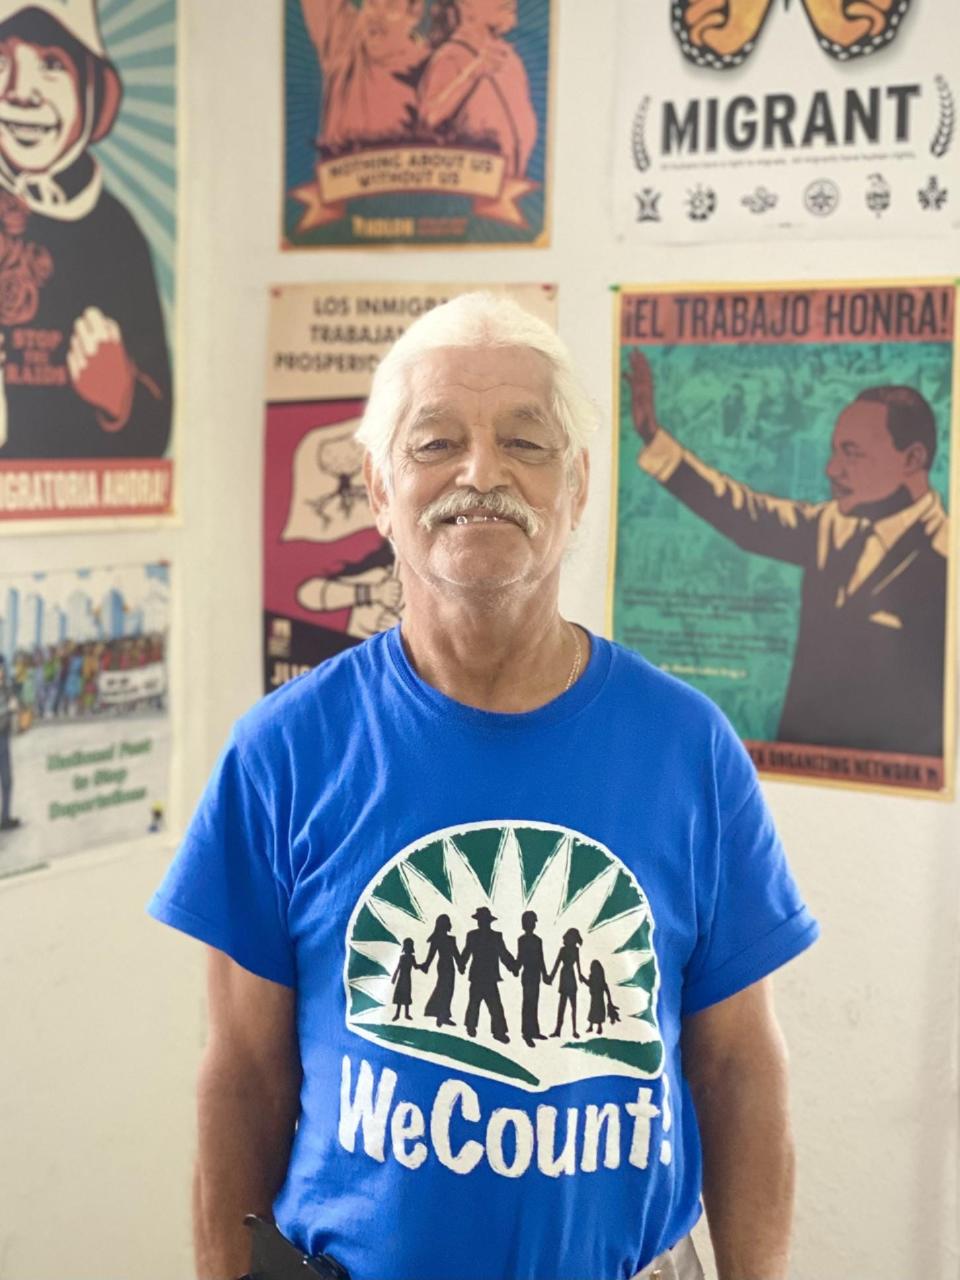 Jose Delgado, 72, is a Homestead, Florida farmworker whose health has suffered from heat. He's an advocate with WeCount, a group for immigrant rights.